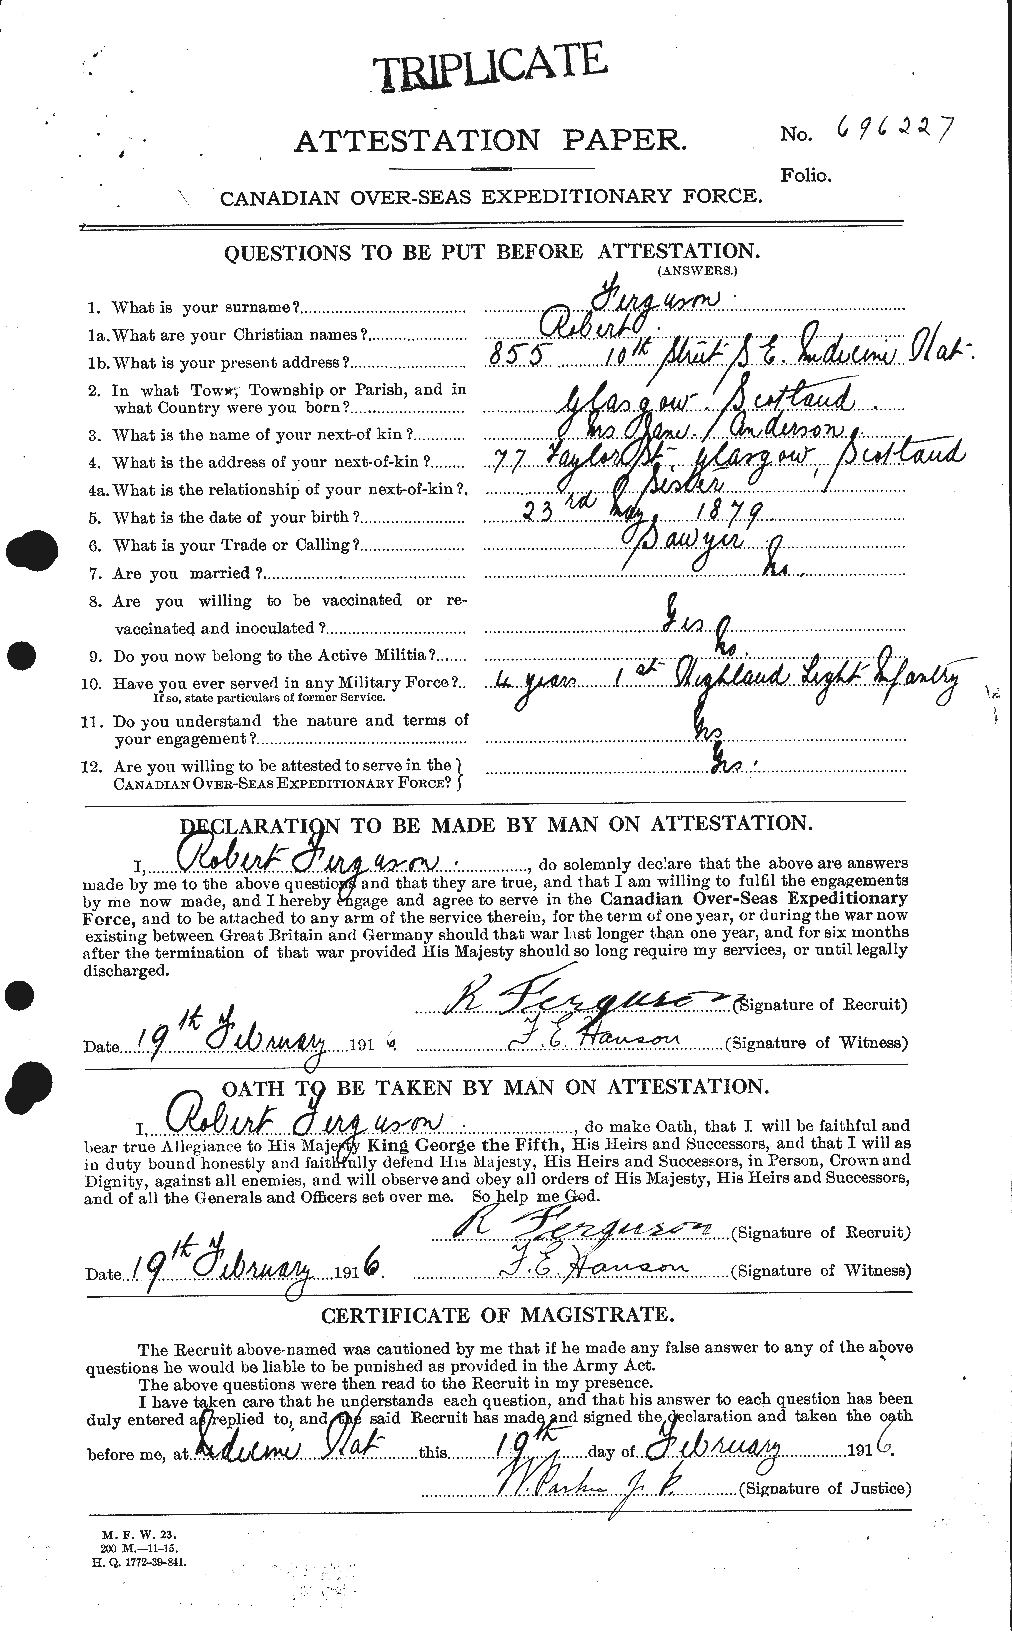 Personnel Records of the First World War - CEF 321234a